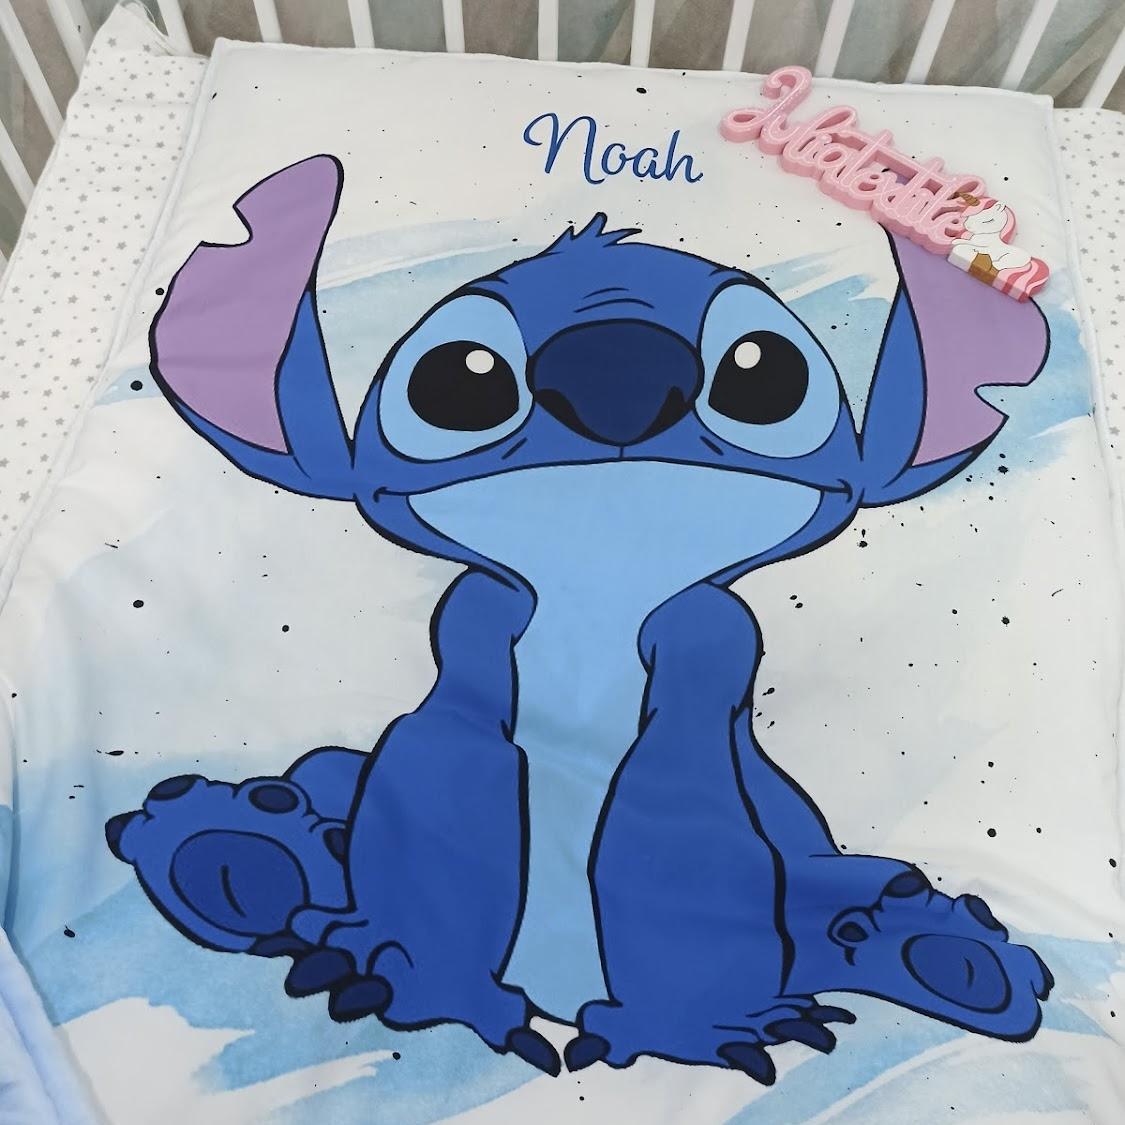 Double-sided blanket with the blue and white Stitch Disney print